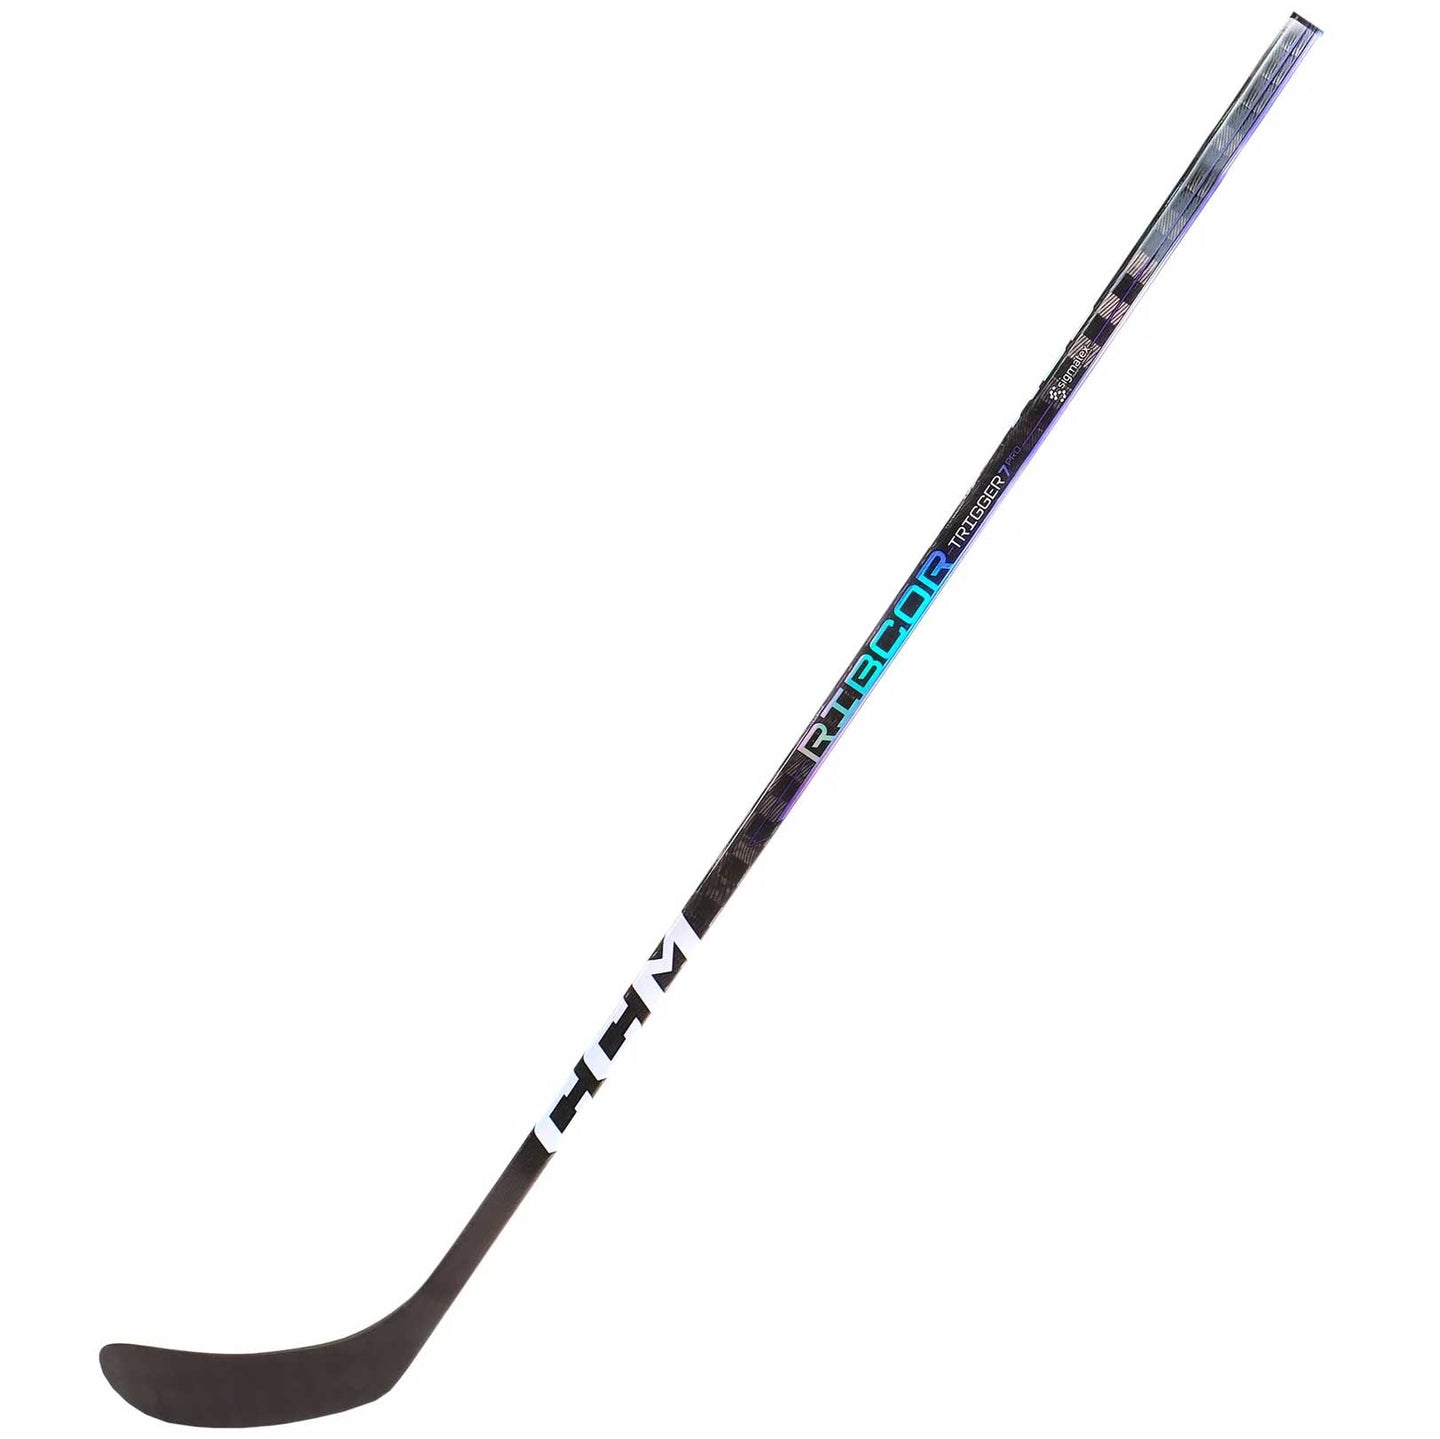 Full view picture of the CCM RIBCOR Trigger 7 PRO Grip Ice Hockey Stick (Intermediate)